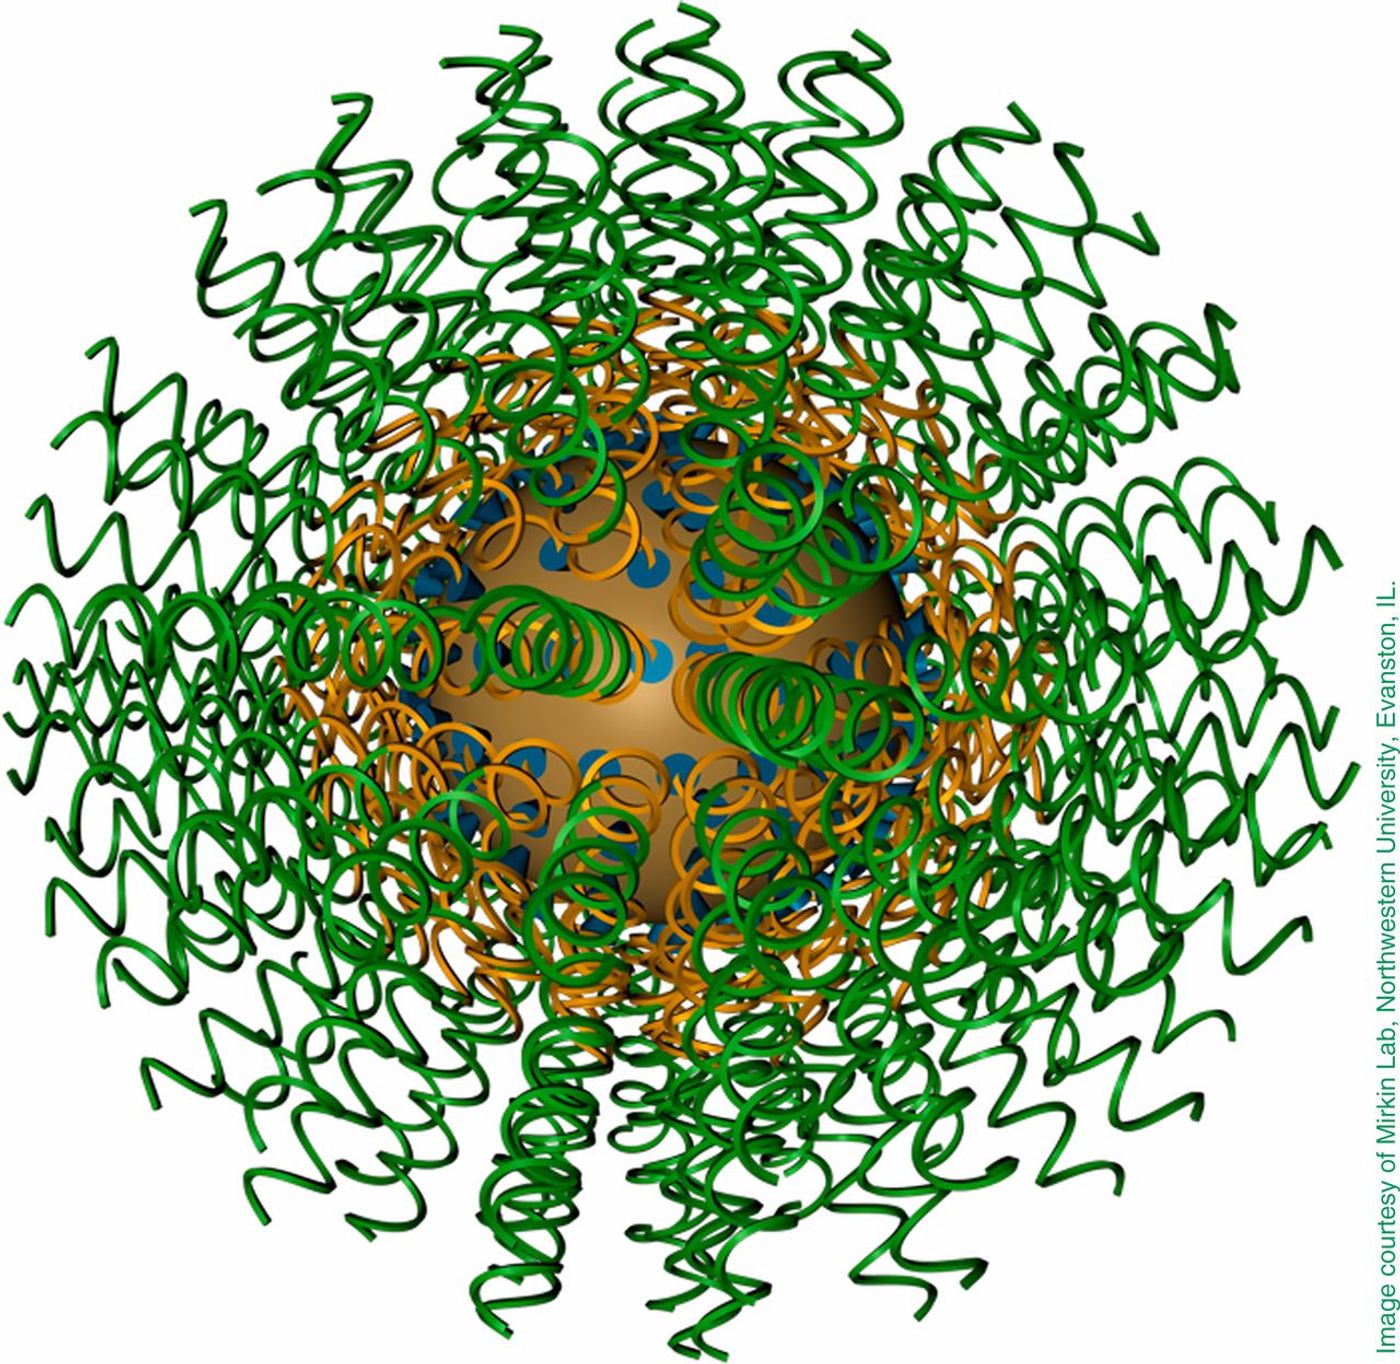 Spherical gold nucleic acid nanoparticle. Source: PNAS